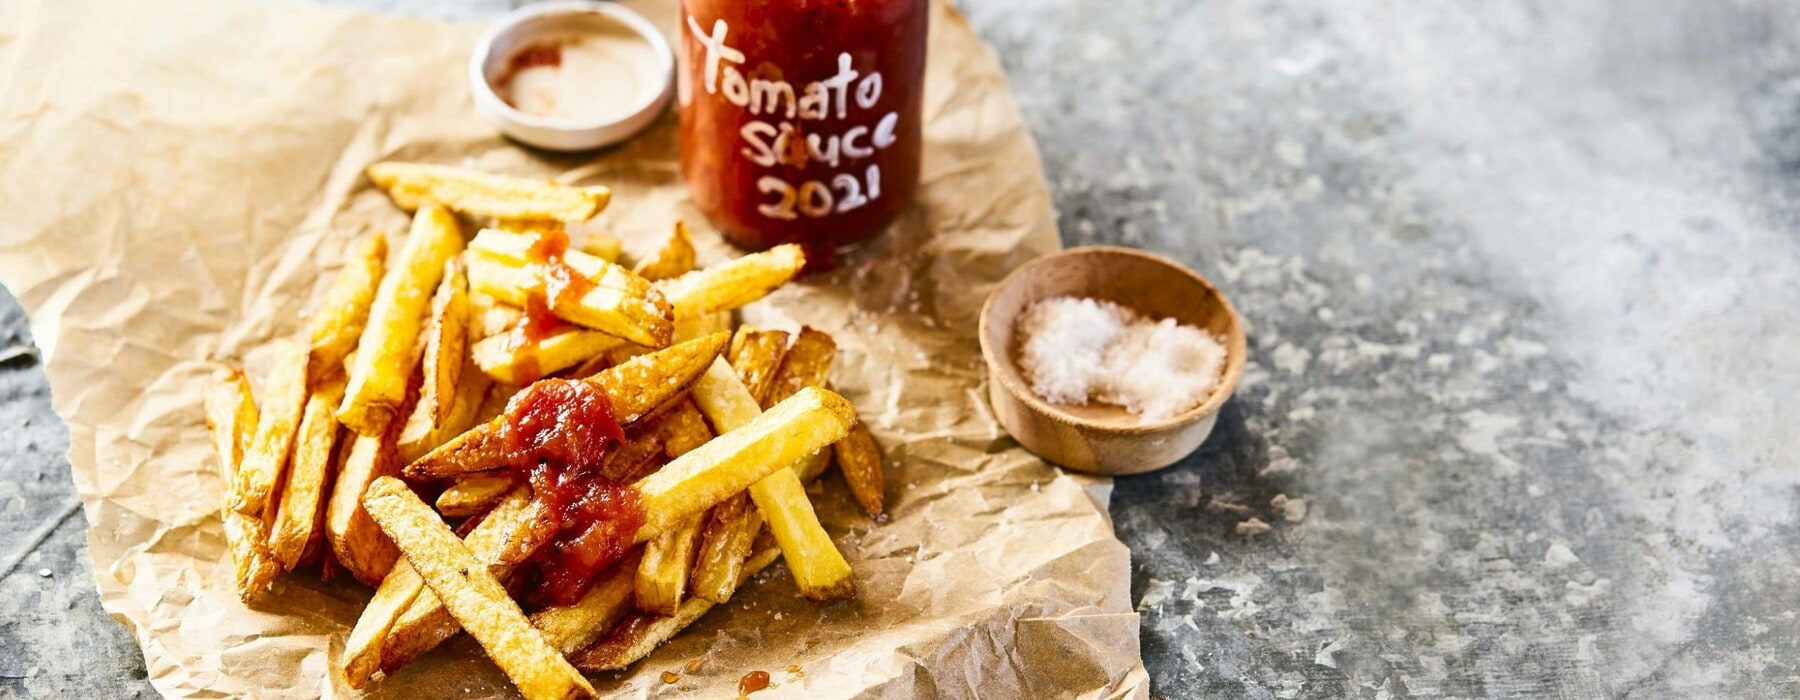 A bottle of tomato sauce surrounded by chips